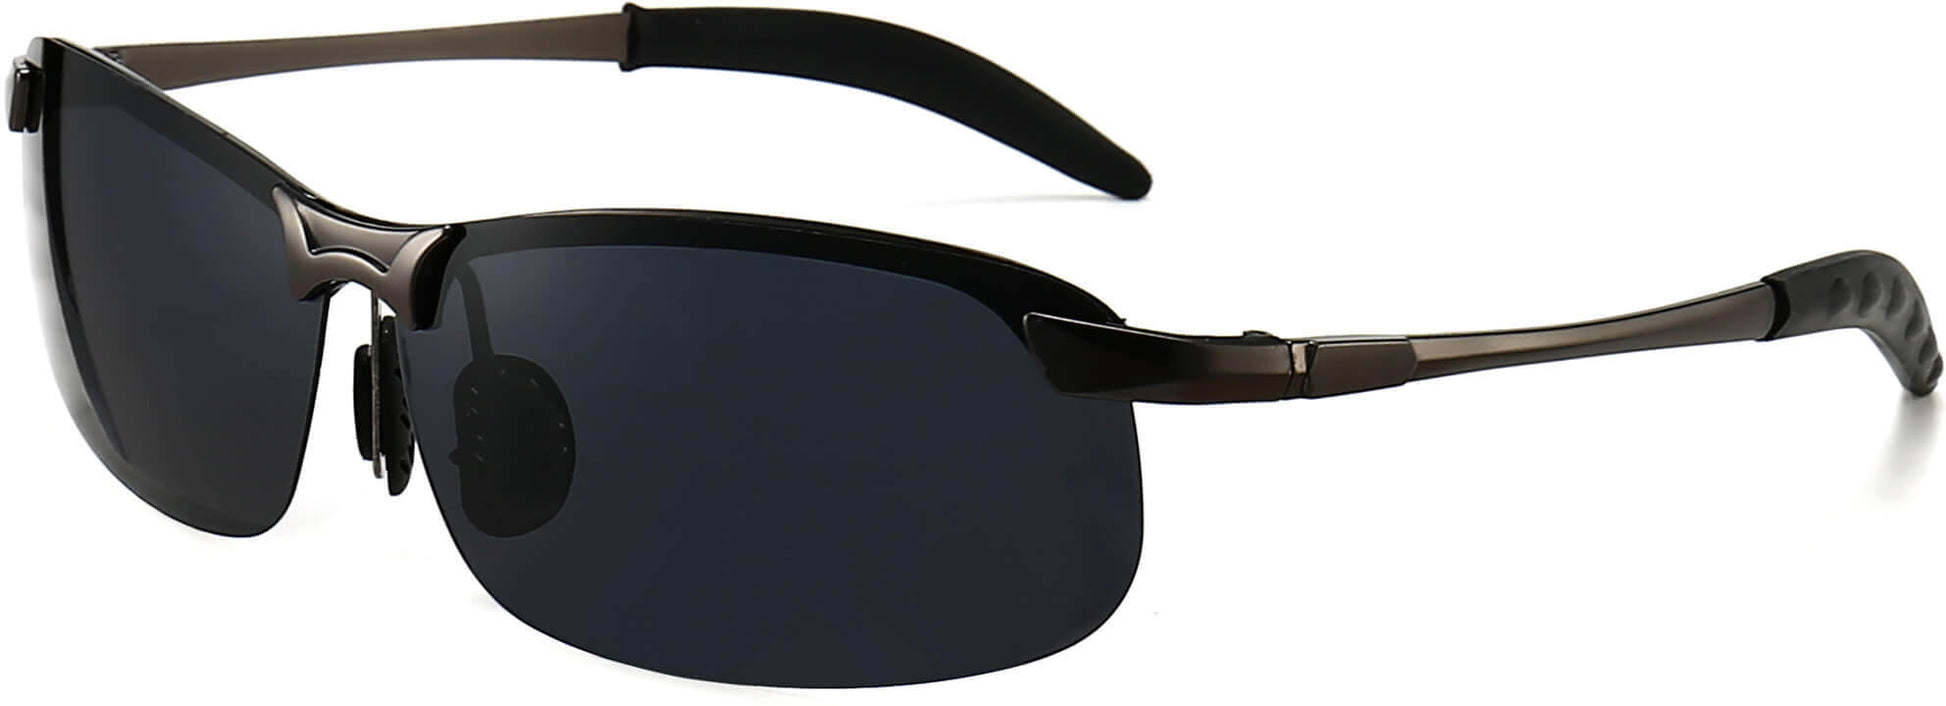 Zoey Black Stainless steel Sunglasses from ANRRI, angle view